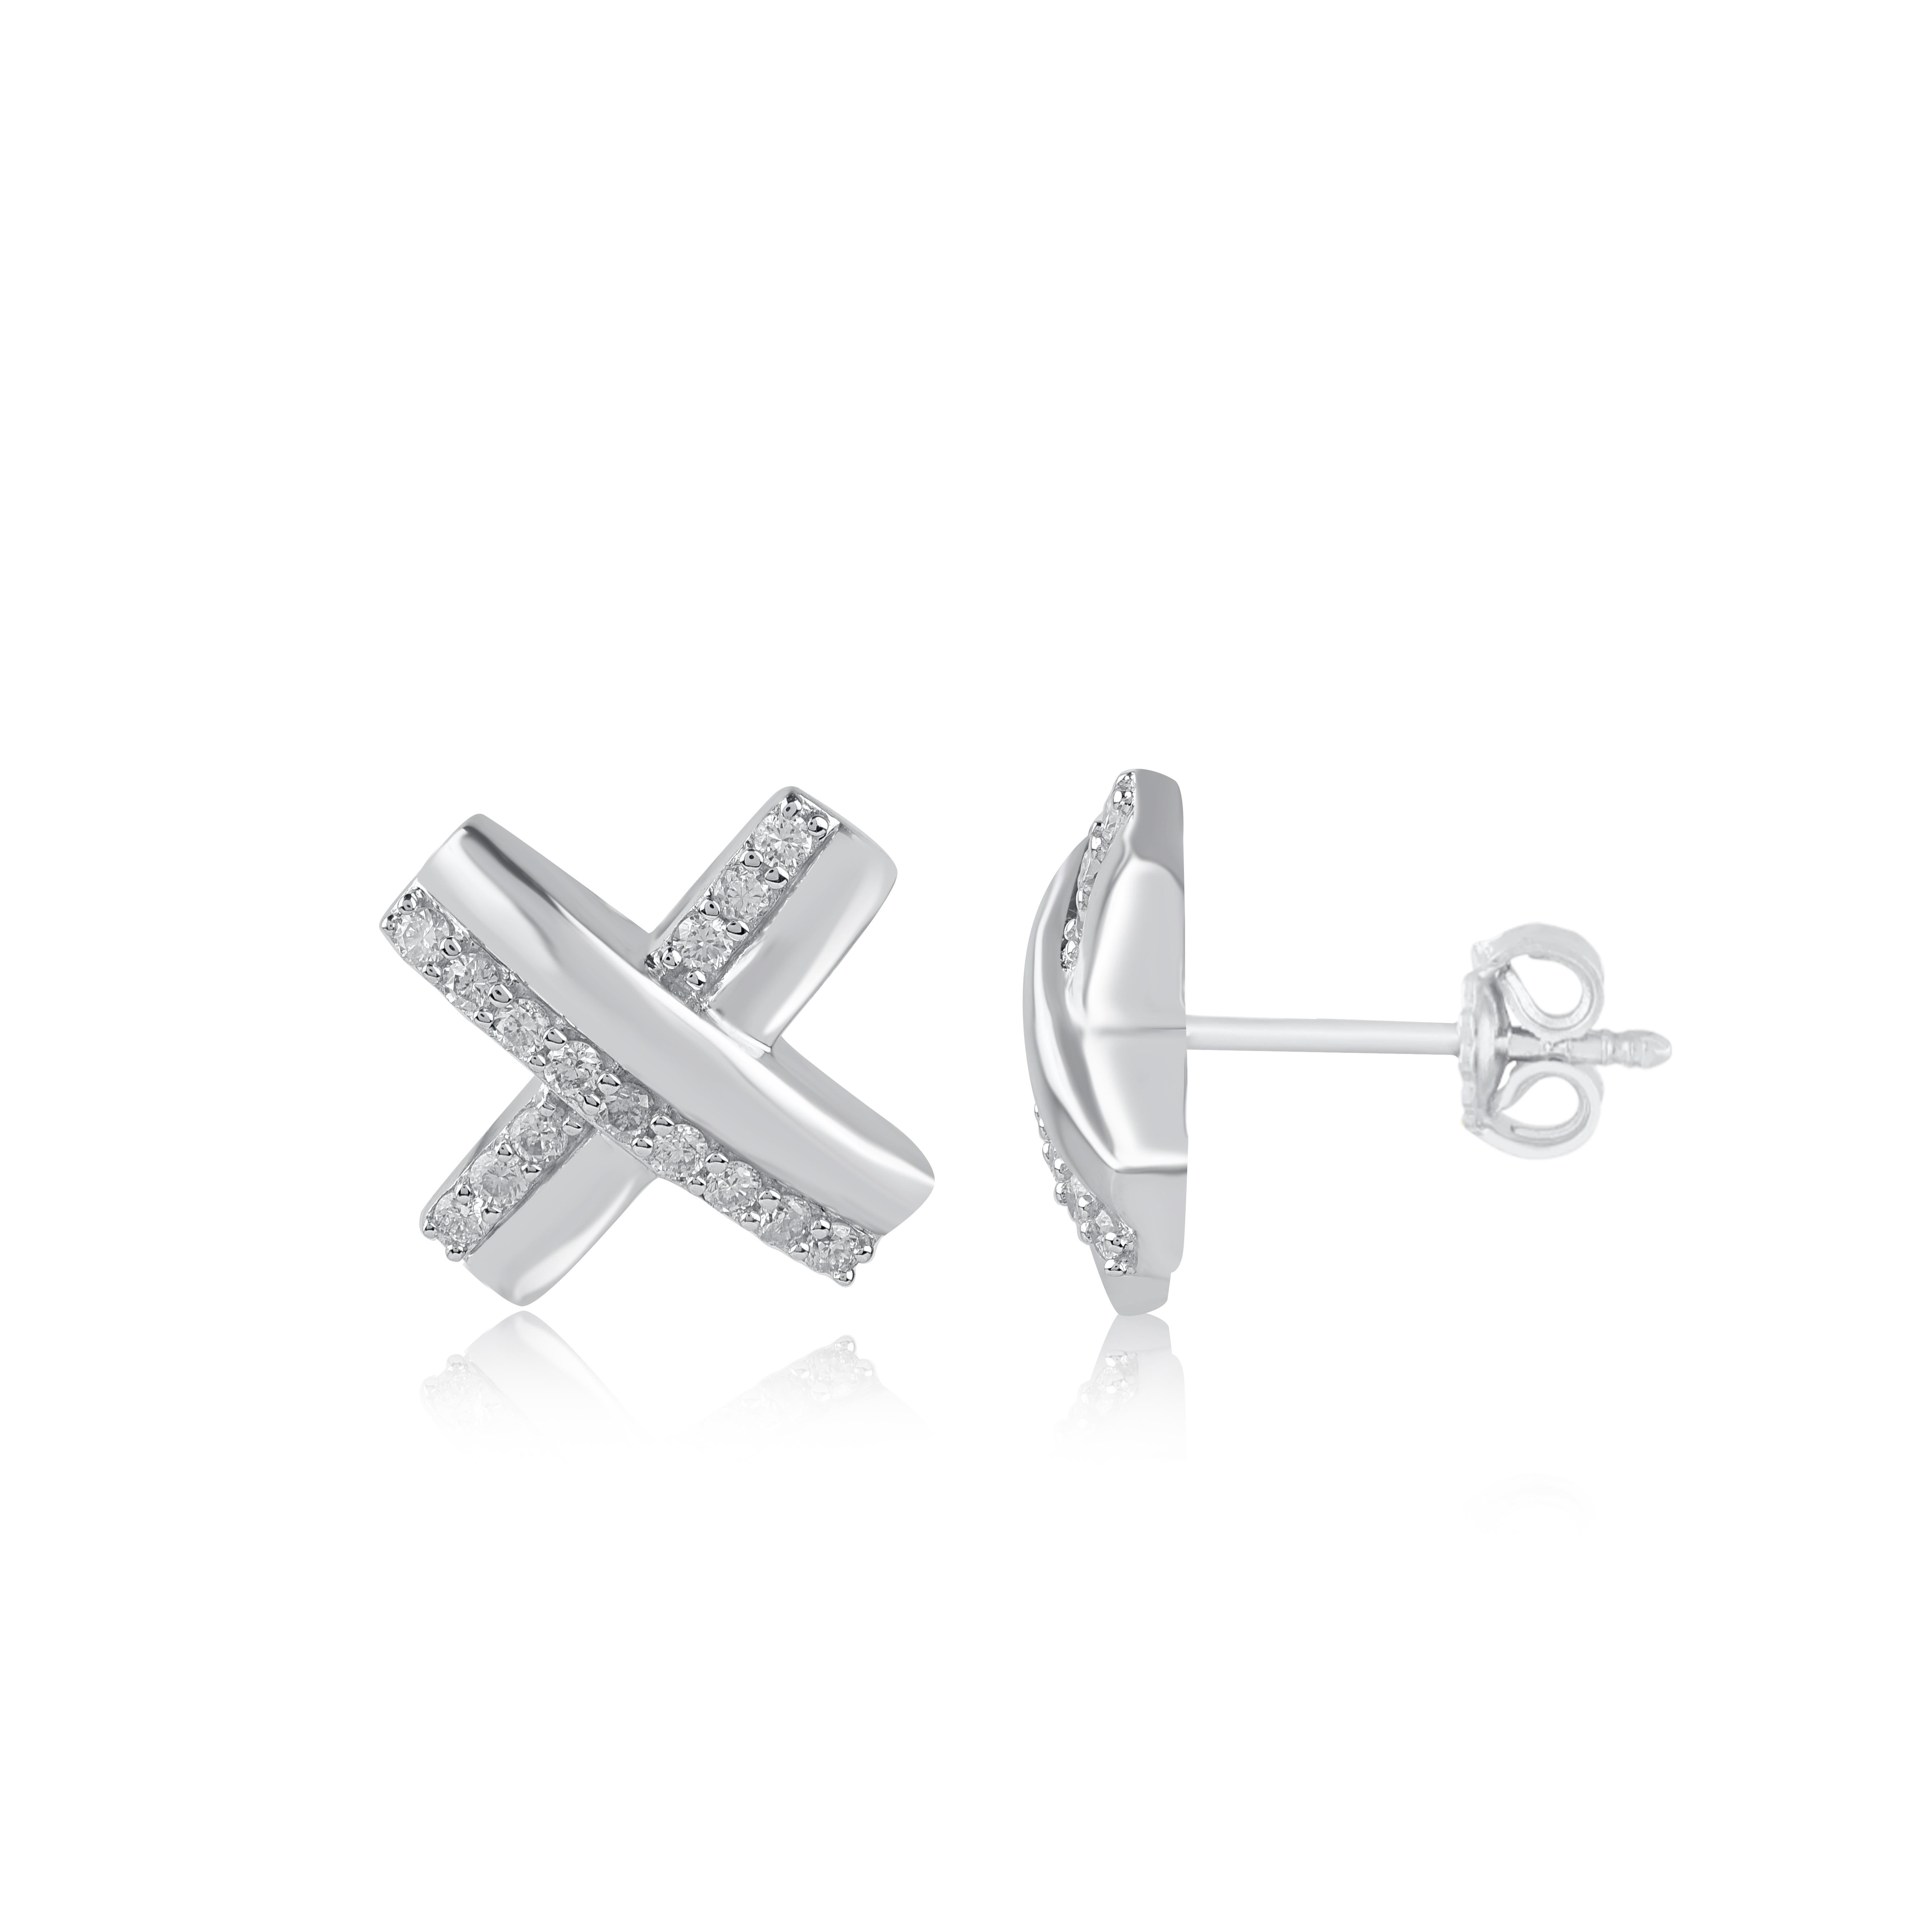 Timeless and elegant, these diamond stud earring are a style you'll wear with every look in your wardrobe. This earring is beautifully designed and studded with 30 natural brilliant cut diamonds set in prong setting. We only use natural, 100%